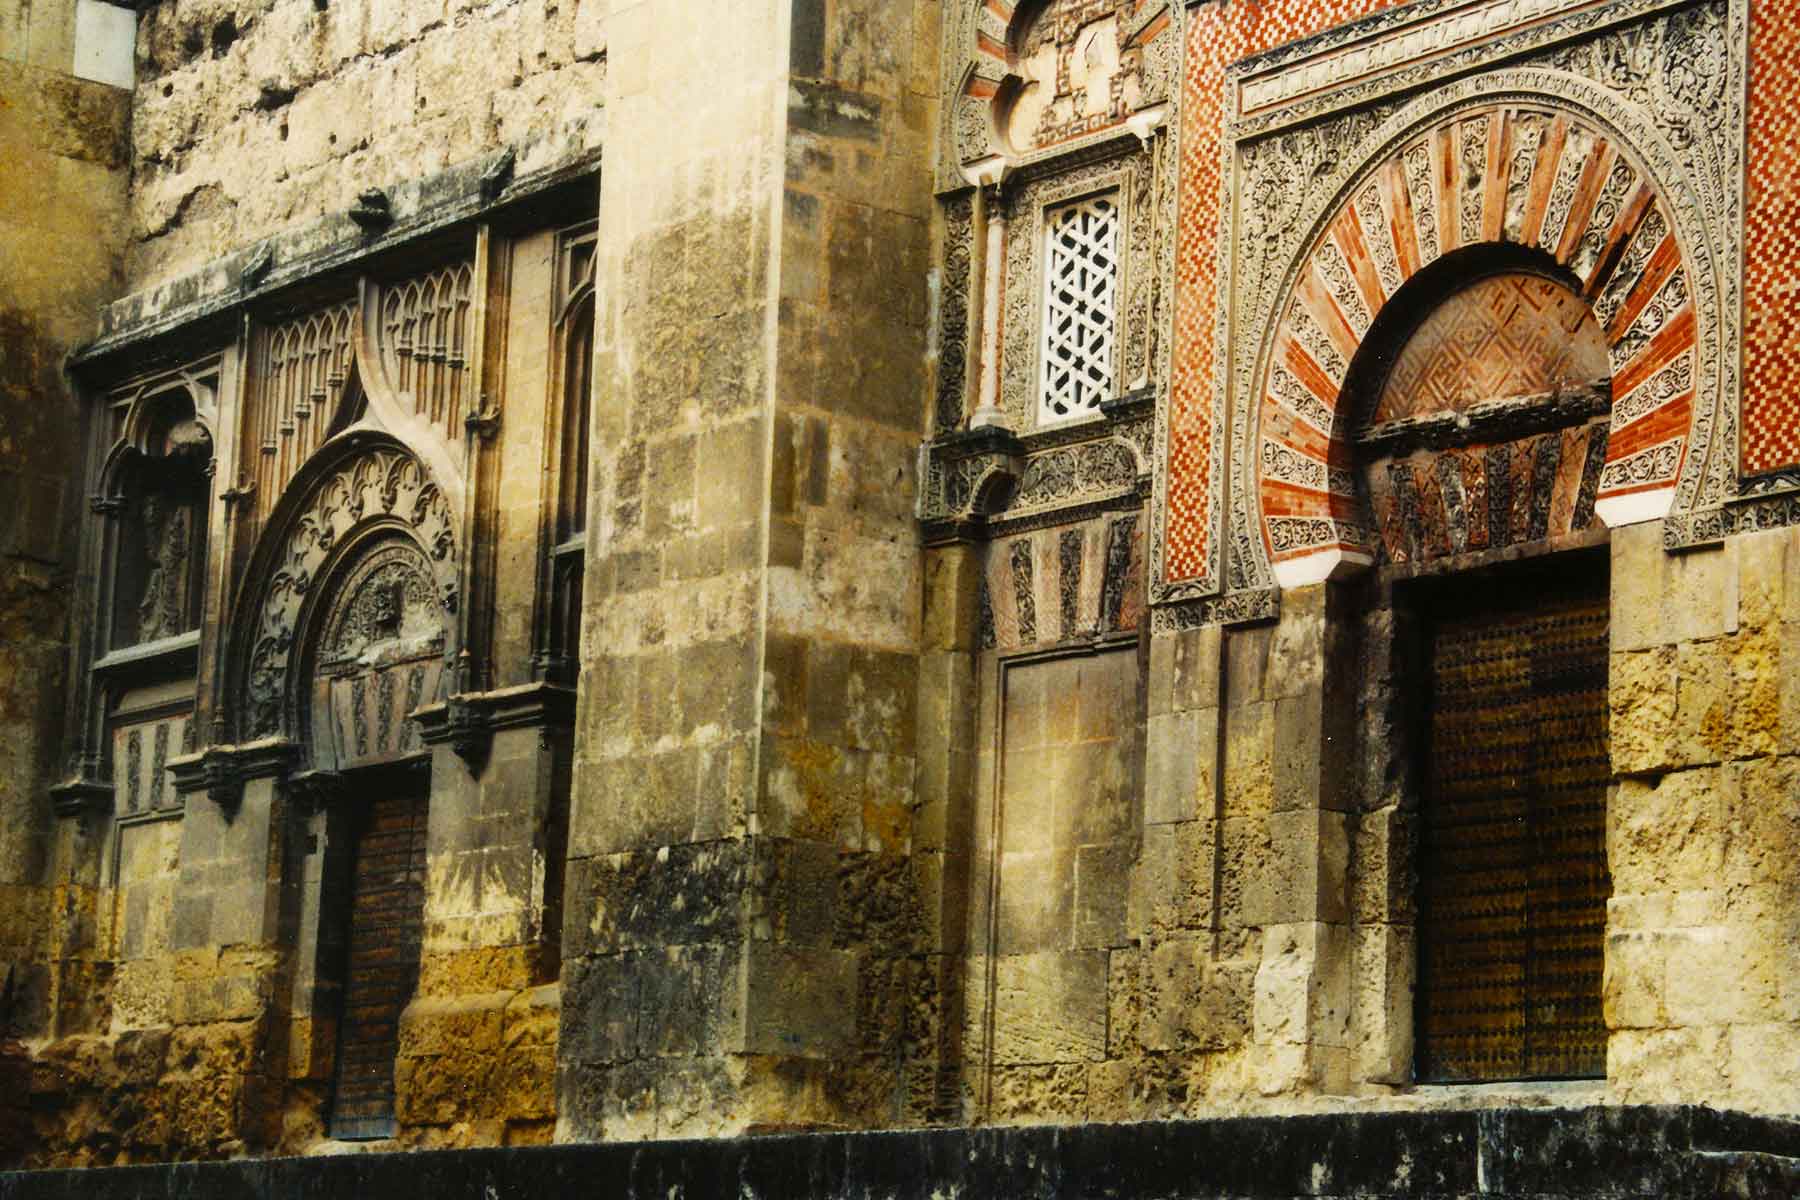 Great Mosque Cordoba - Spain Photo Journal - Steven Andrew Martin - Study Abroad 1998